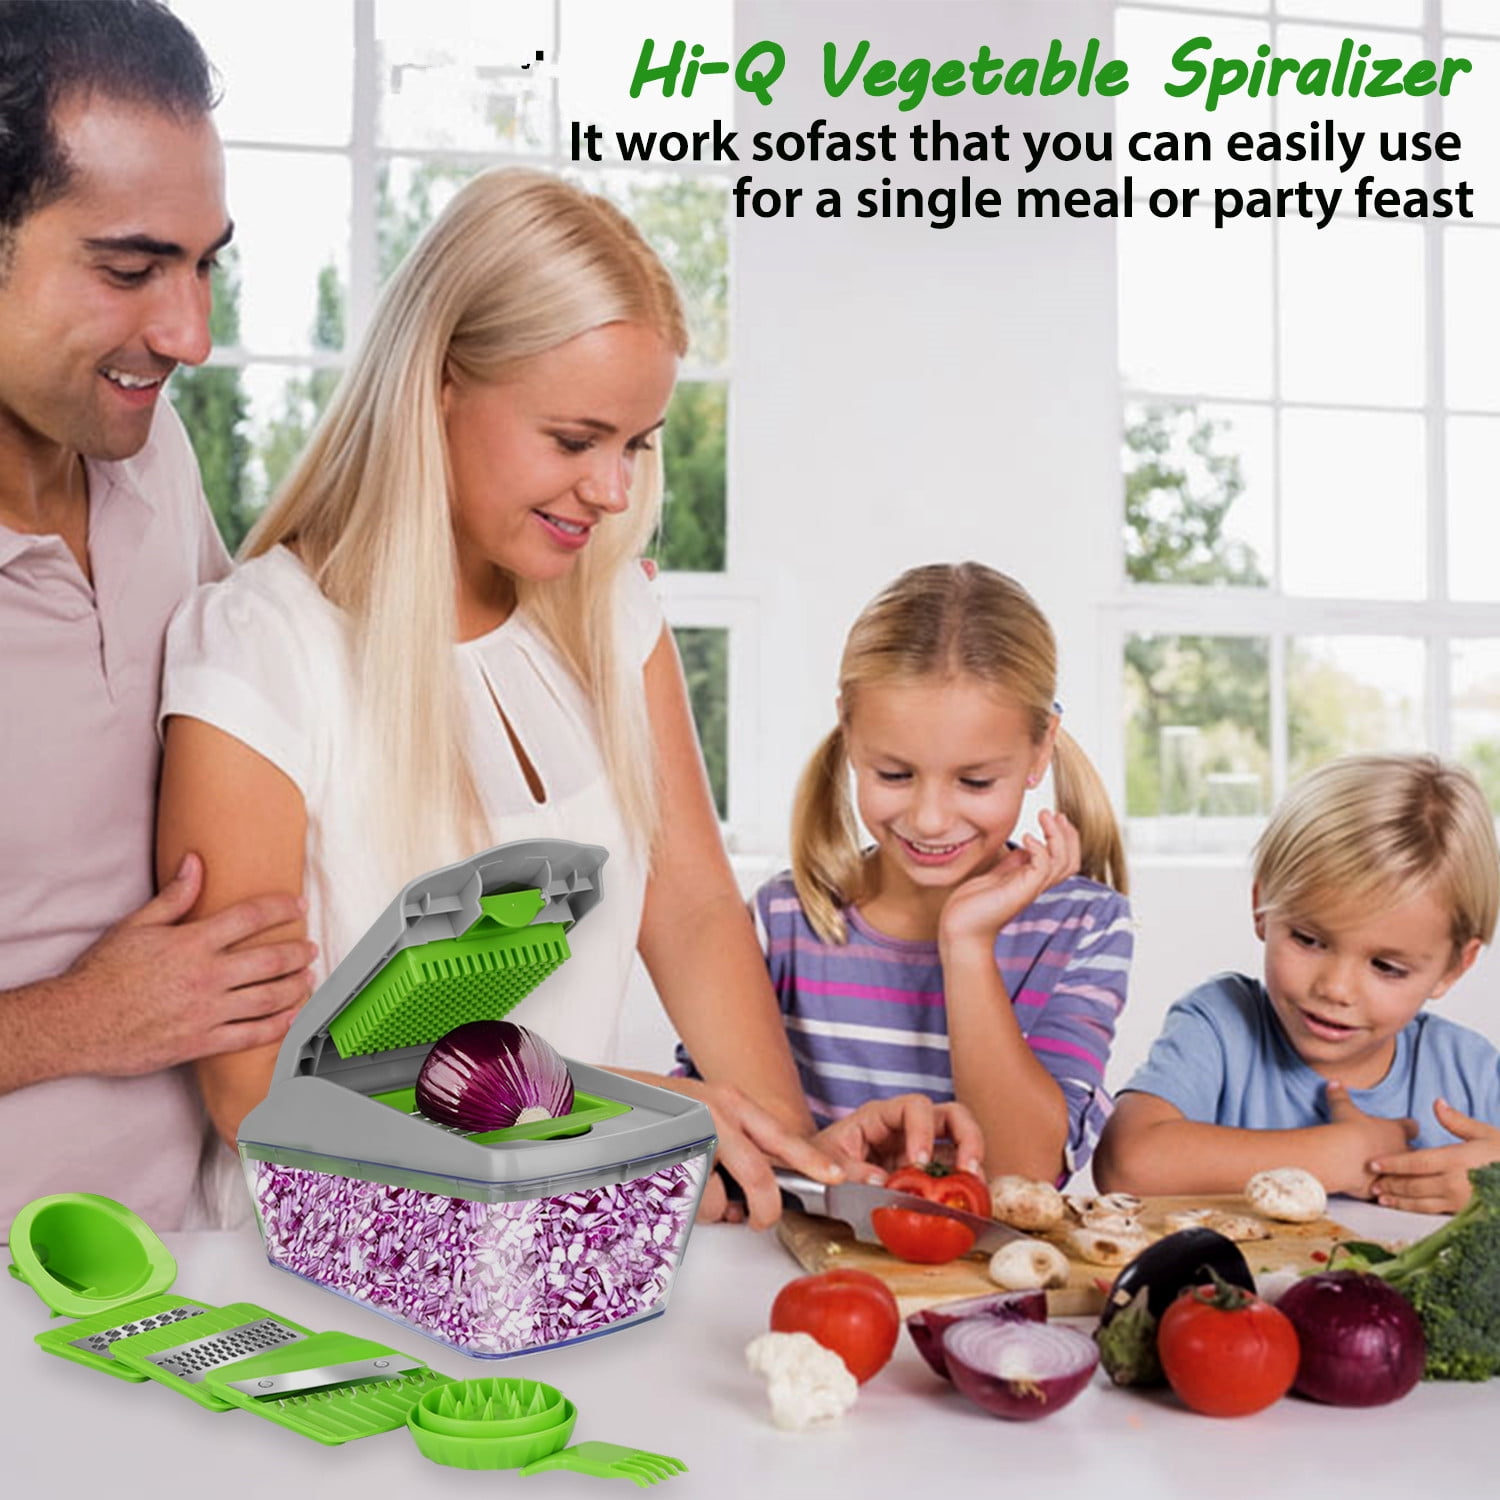 Eatex 21-Piece Vegetable Chopper with Container - Salad Chopper, Peeler, Spiralizer